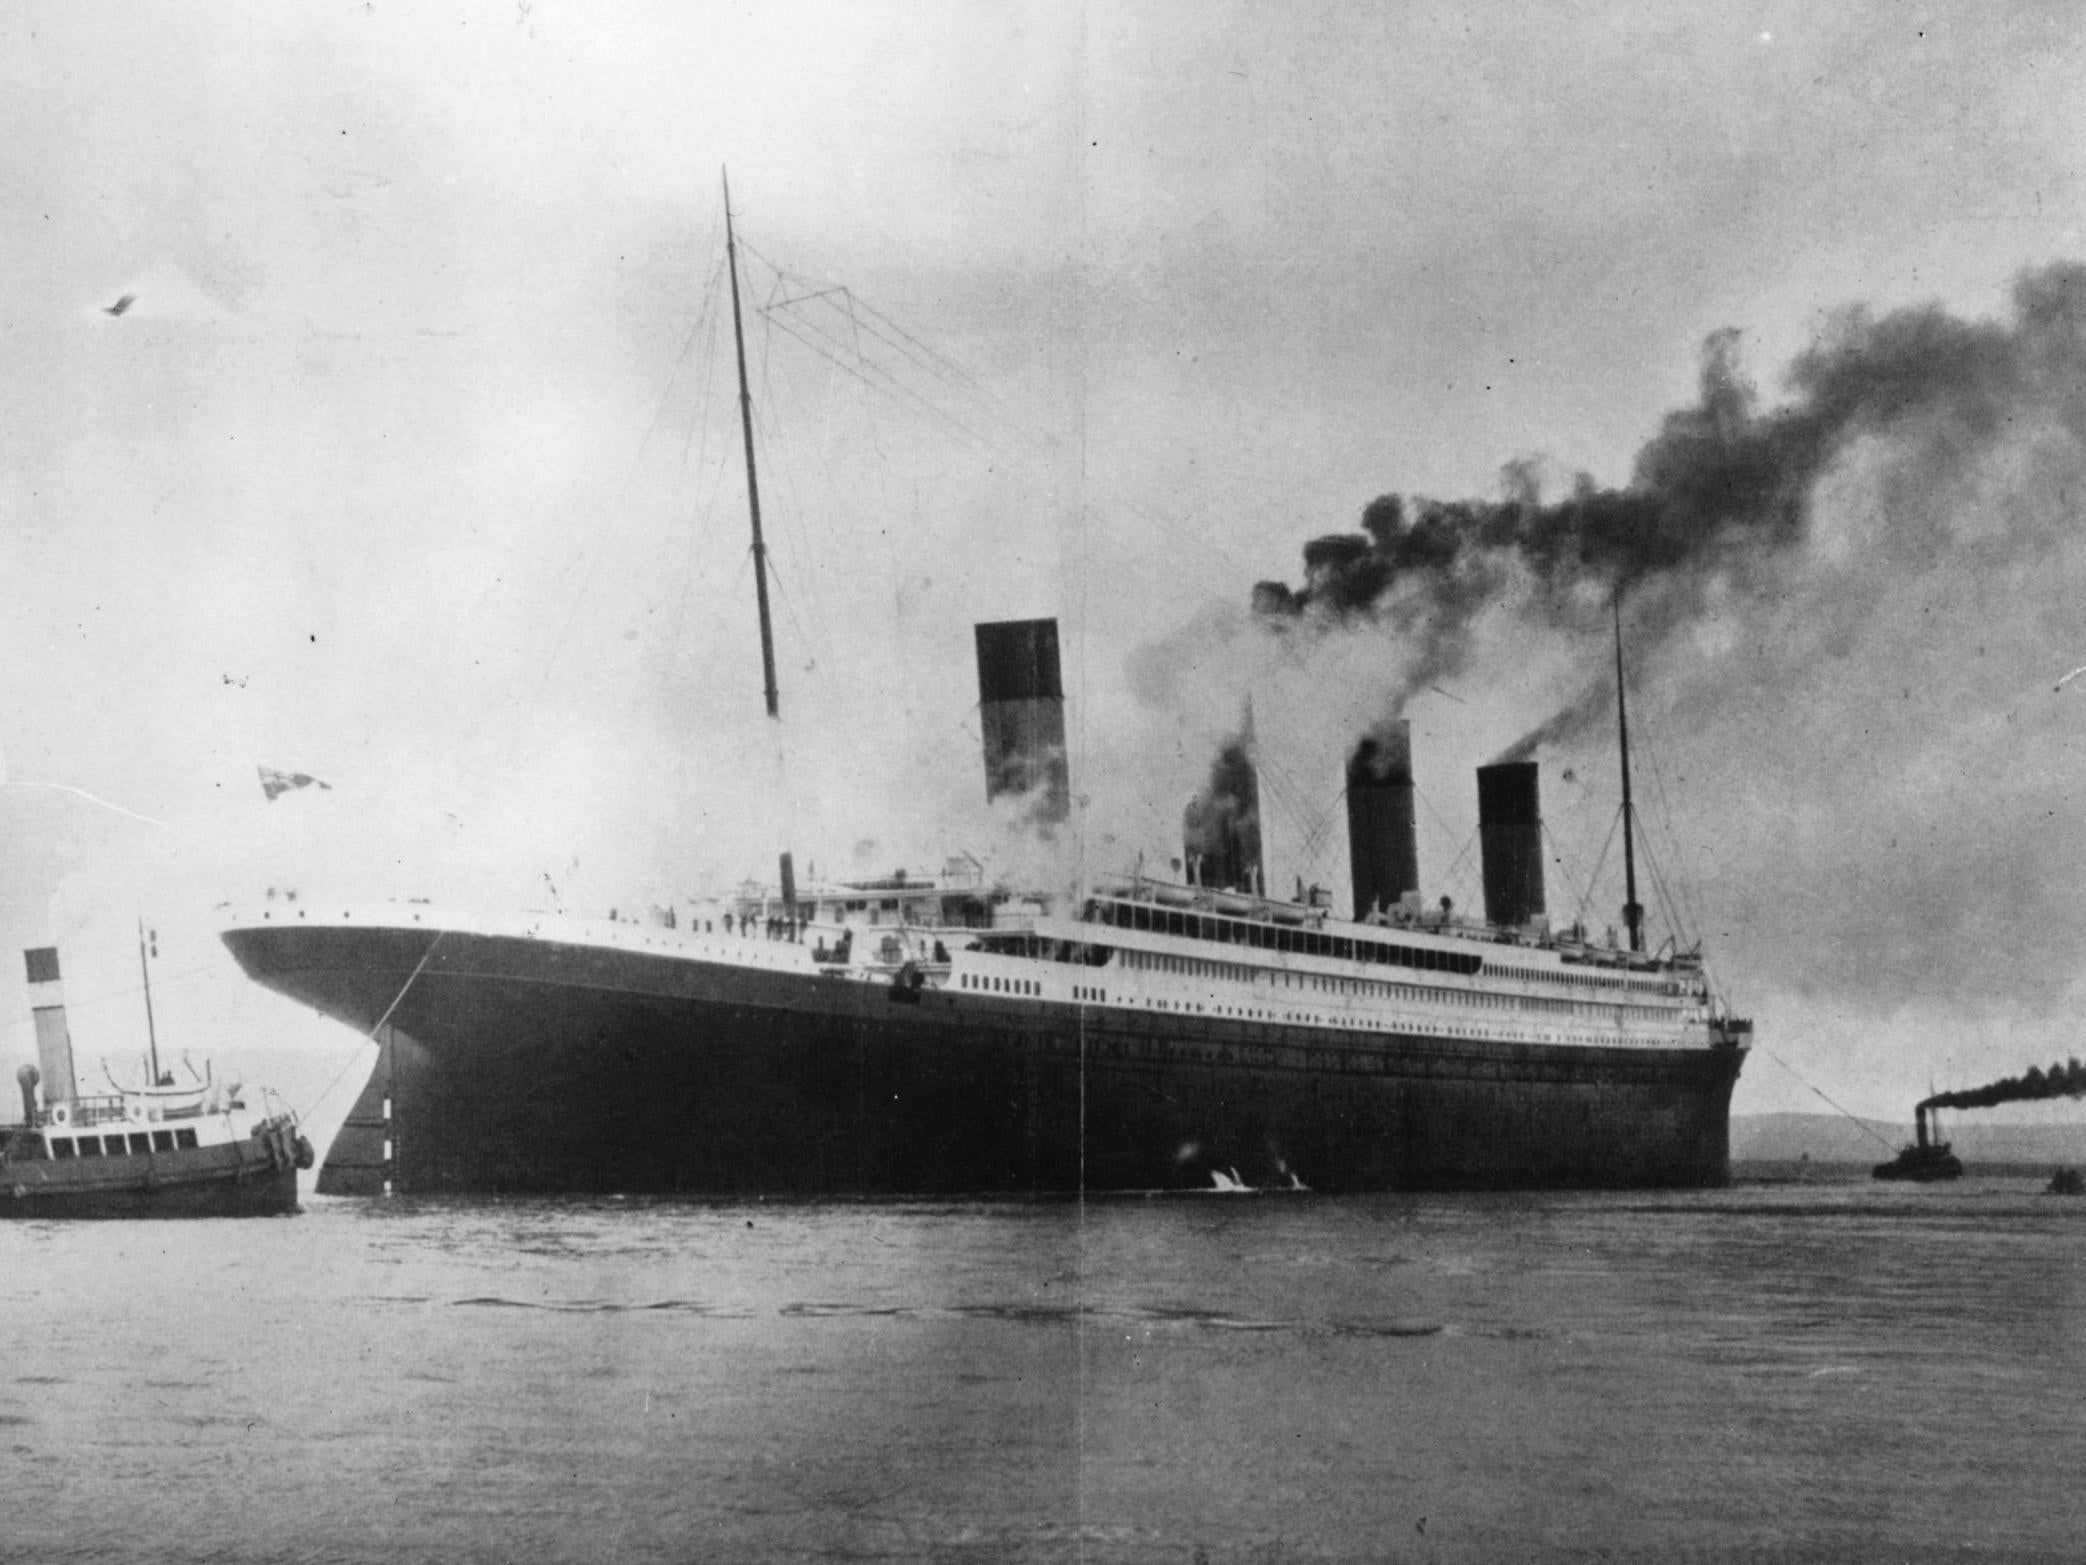 The luxury White Star liner 'Titanic', which sank on its maiden voyage to America in 1912, seen here on trials in Belfast Lough